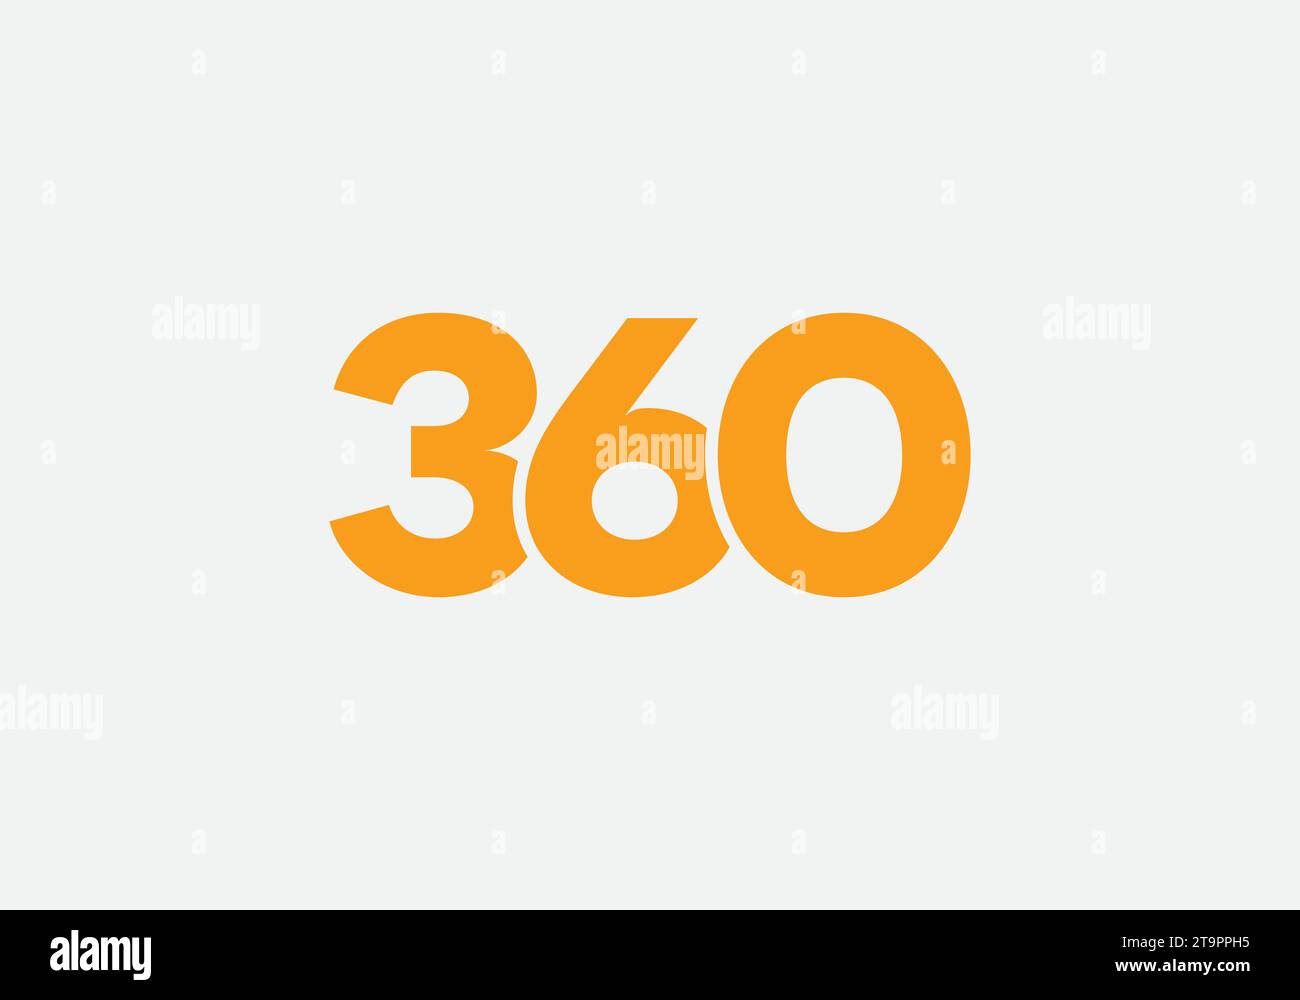 360 degree icon and symbol. 360 degree view. Vector illustration Stock Vector